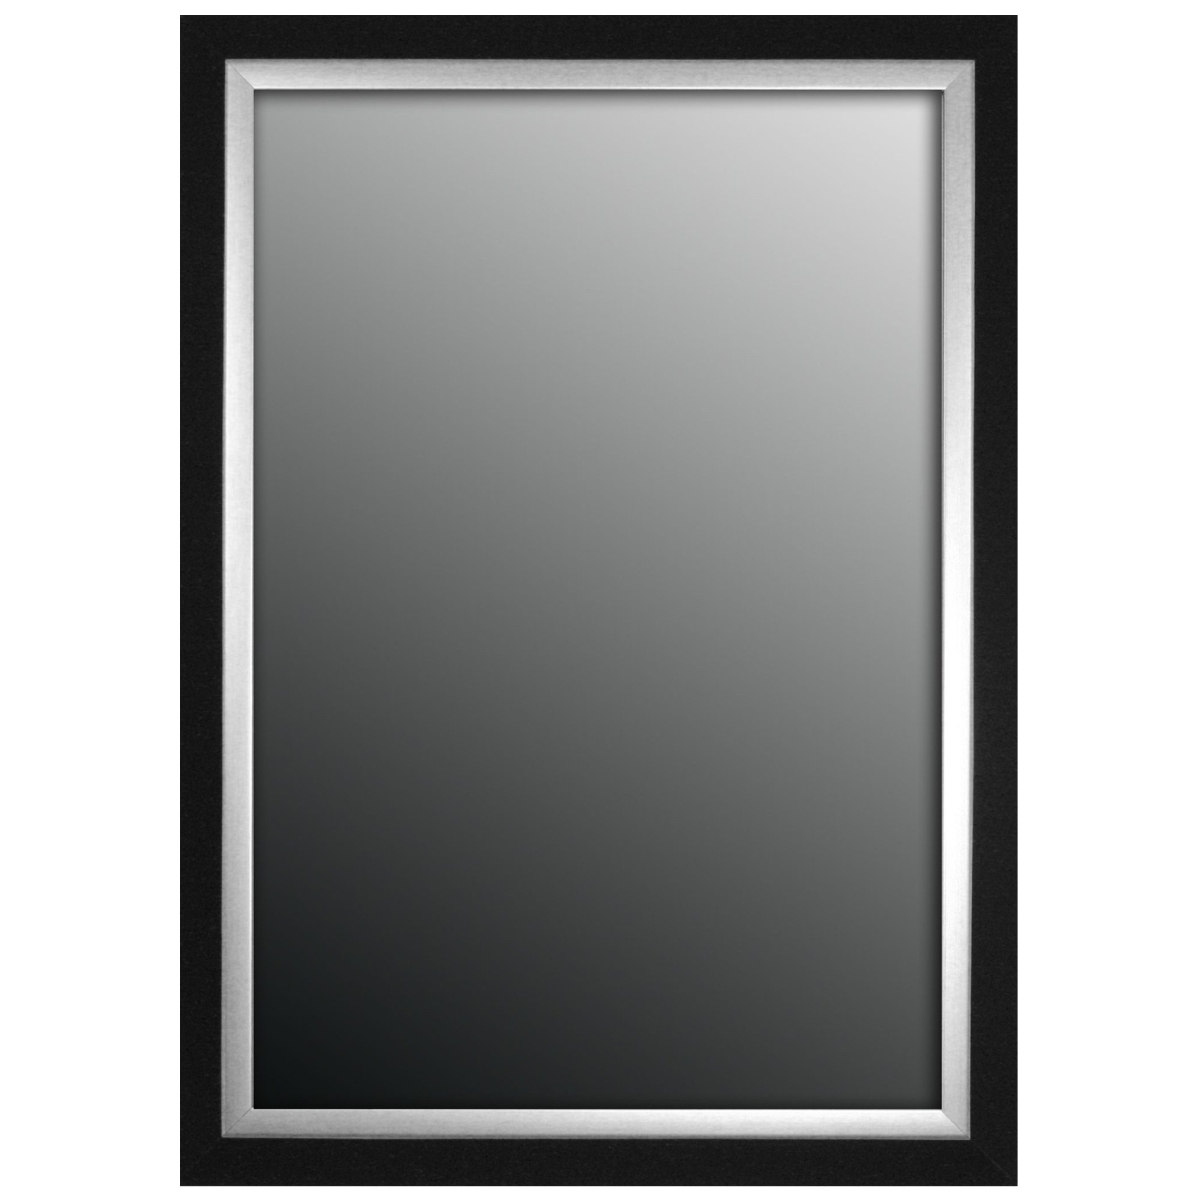 Hitchcock Butterfield 807502 Black & Brushed Nickel Silver Montevideo Natural Wall Mirror - 28.75 X 40.75 In.